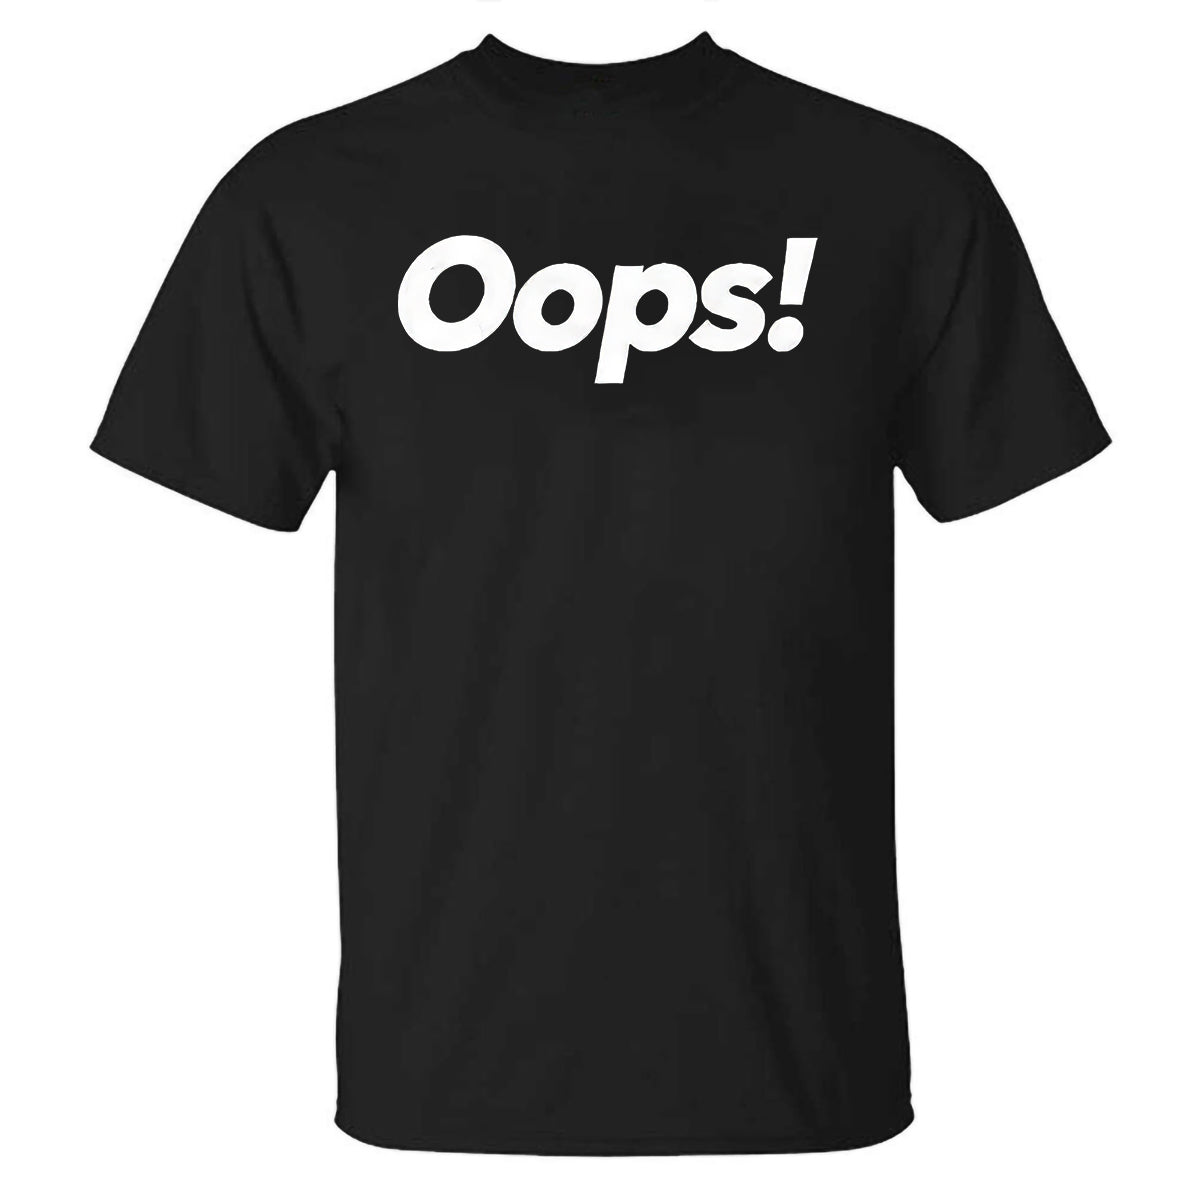 Oops! Printed Casual T-shirt